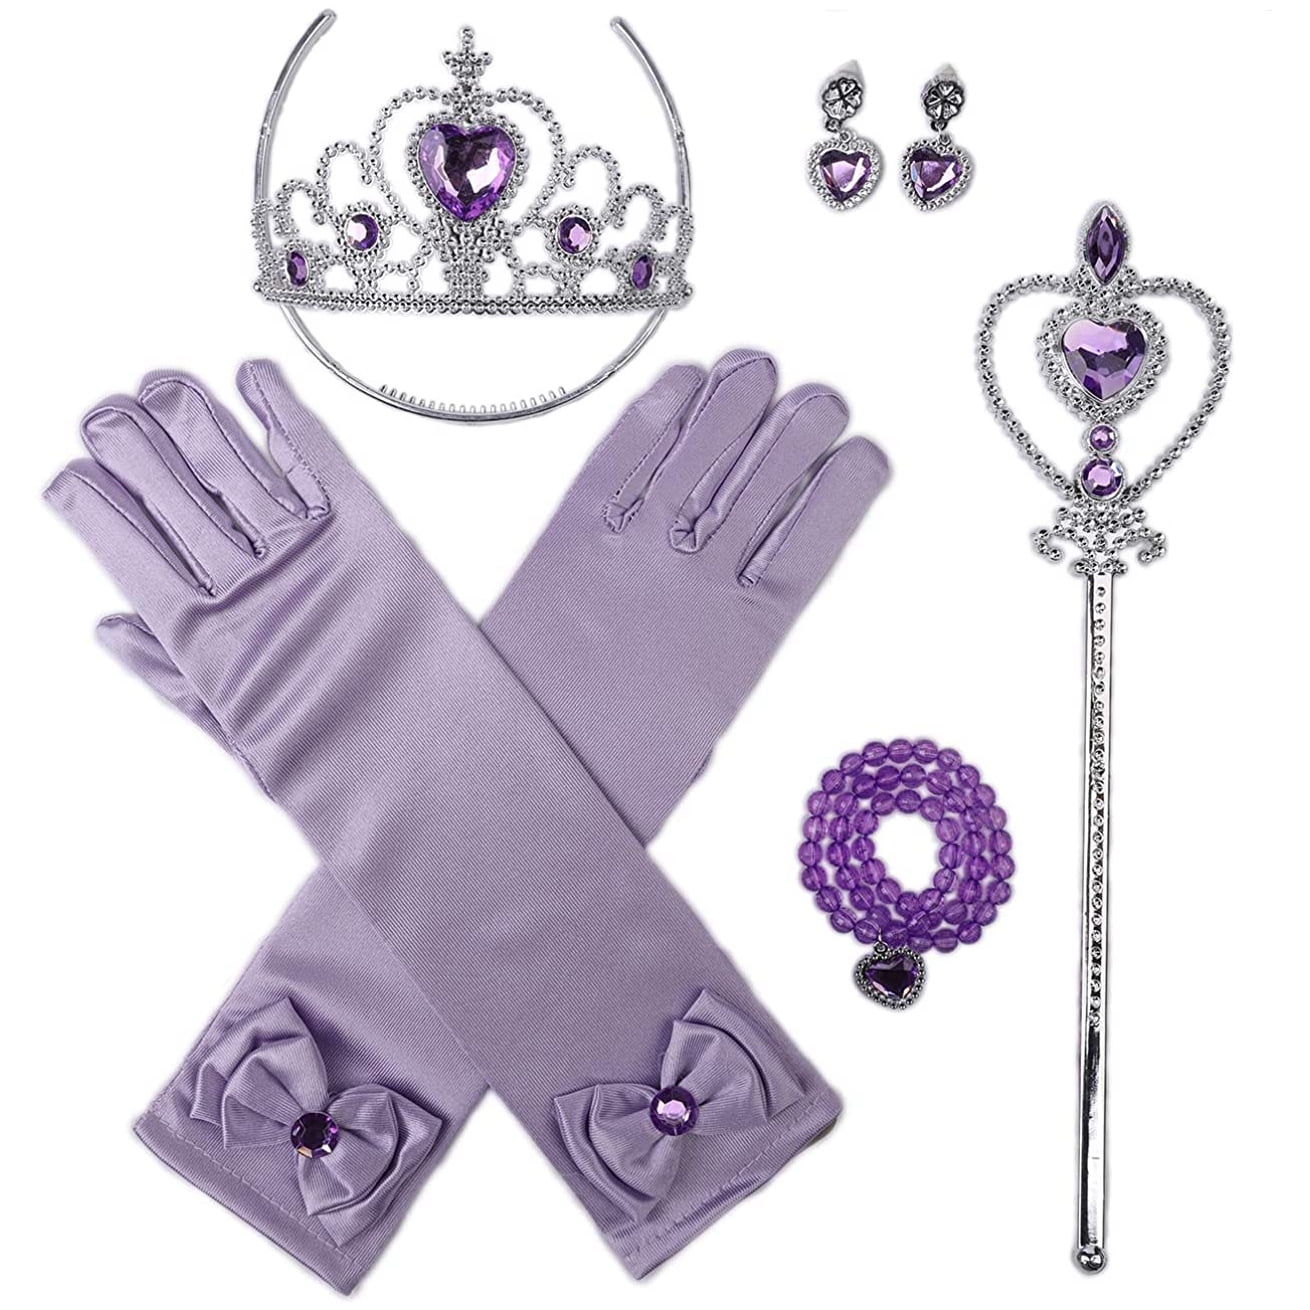 Gloves Tiara Crown Wand Necklace Girls Princess Dress Up Costume Christmas Party 